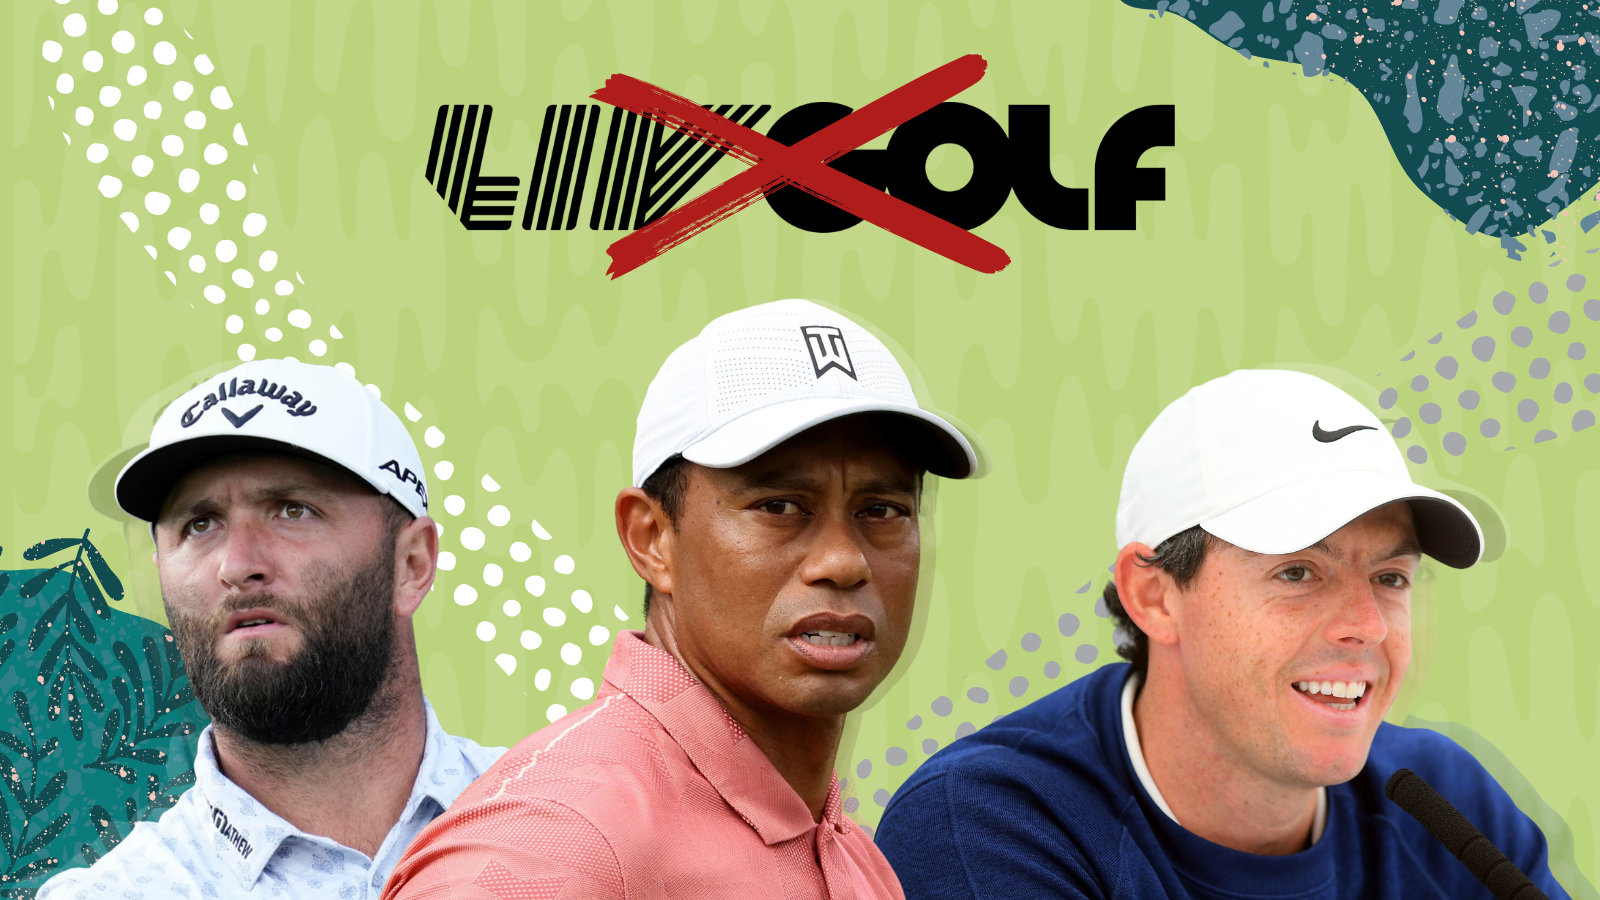 John Rahm, Tiger Woods and Rory McIlroy stand underneath the LIV Golf logo with a red "x" through it